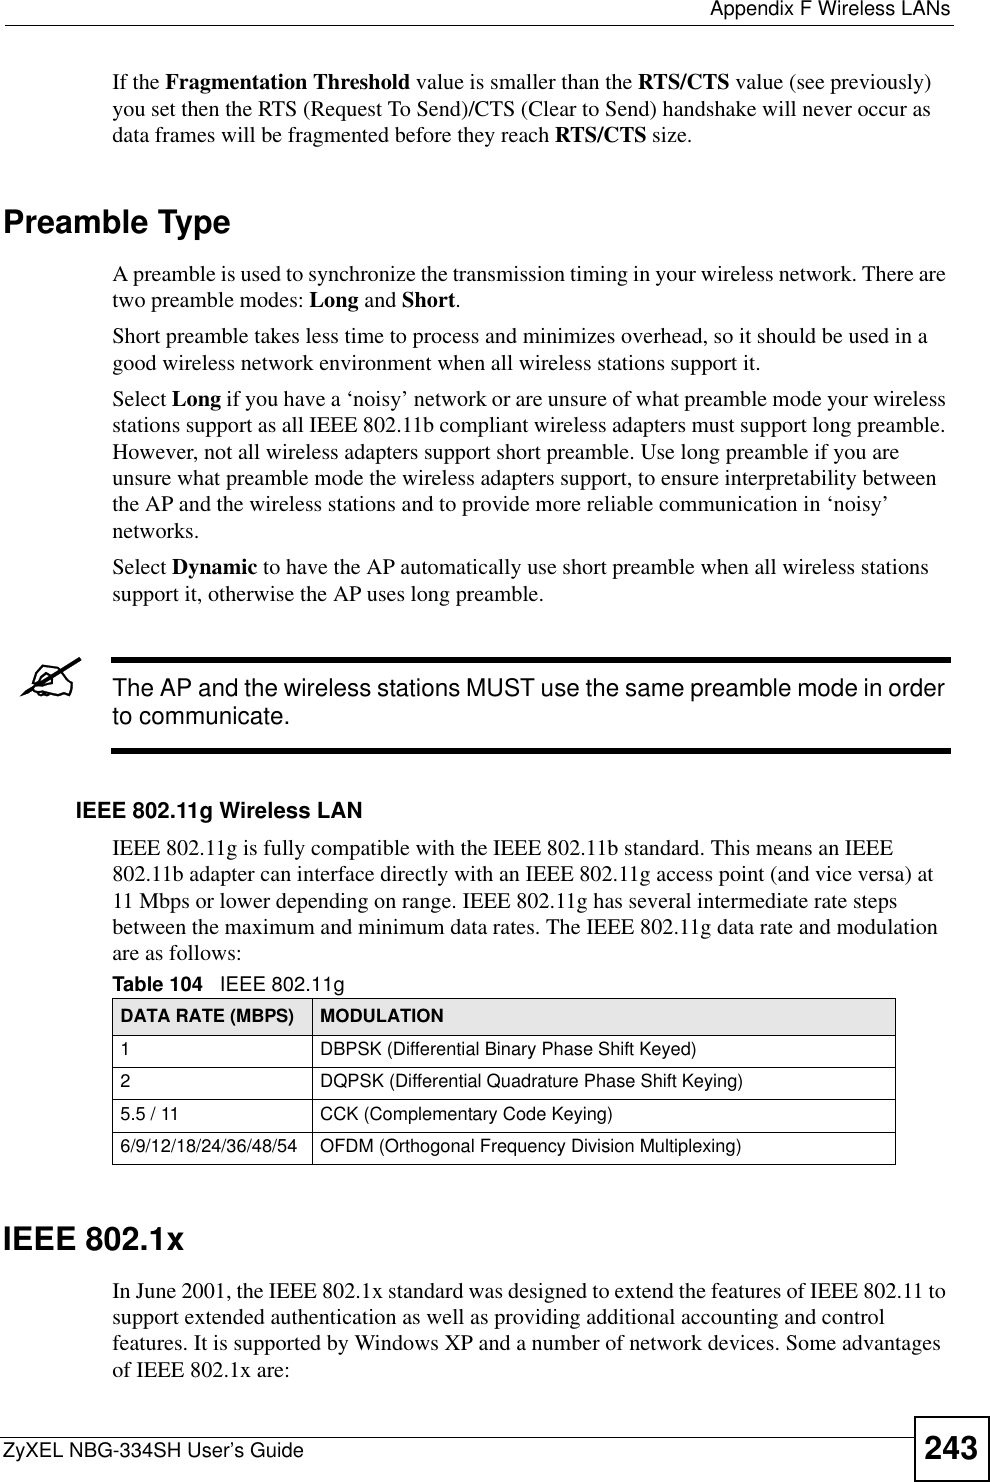  Appendix F Wireless LANsZyXEL NBG-334SH User’s Guide 243If the Fragmentation Threshold value is smaller than the RTS/CTS value (see previously) you set then the RTS (Request To Send)/CTS (Clear to Send) handshake will never occur as data frames will be fragmented before they reach RTS/CTS size.Preamble TypeA preamble is used to synchronize the transmission timing in your wireless network. There are two preamble modes: Long and Short.Short preamble takes less time to process and minimizes overhead, so it should be used in a good wireless network environment when all wireless stations support it. Select Long if you have a ‘noisy’ network or are unsure of what preamble mode your wireless stations support as all IEEE 802.11b compliant wireless adapters must support long preamble. However, not all wireless adapters support short preamble. Use long preamble if you are unsure what preamble mode the wireless adapters support, to ensure interpretability between the AP and the wireless stations and to provide more reliable communication in ‘noisy’ networks. Select Dynamic to have the AP automatically use short preamble when all wireless stations support it, otherwise the AP uses long preamble.&quot;The AP and the wireless stations MUST use the same preamble mode in order to communicate.IEEE 802.11g Wireless LANIEEE 802.11g is fully compatible with the IEEE 802.11b standard. This means an IEEE 802.11b adapter can interface directly with an IEEE 802.11g access point (and vice versa) at 11 Mbps or lower depending on range. IEEE 802.11g has several intermediate rate steps between the maximum and minimum data rates. The IEEE 802.11g data rate and modulation are as follows:IEEE 802.1xIn June 2001, the IEEE 802.1x standard was designed to extend the features of IEEE 802.11 to support extended authentication as well as providing additional accounting and control features. It is supported by Windows XP and a number of network devices. Some advantages of IEEE 802.1x are:Table 104   IEEE 802.11gDATA RATE (MBPS) MODULATION1 DBPSK (Differential Binary Phase Shift Keyed)2 DQPSK (Differential Quadrature Phase Shift Keying)5.5 / 11 CCK (Complementary Code Keying) 6/9/12/18/24/36/48/54 OFDM (Orthogonal Frequency Division Multiplexing) 